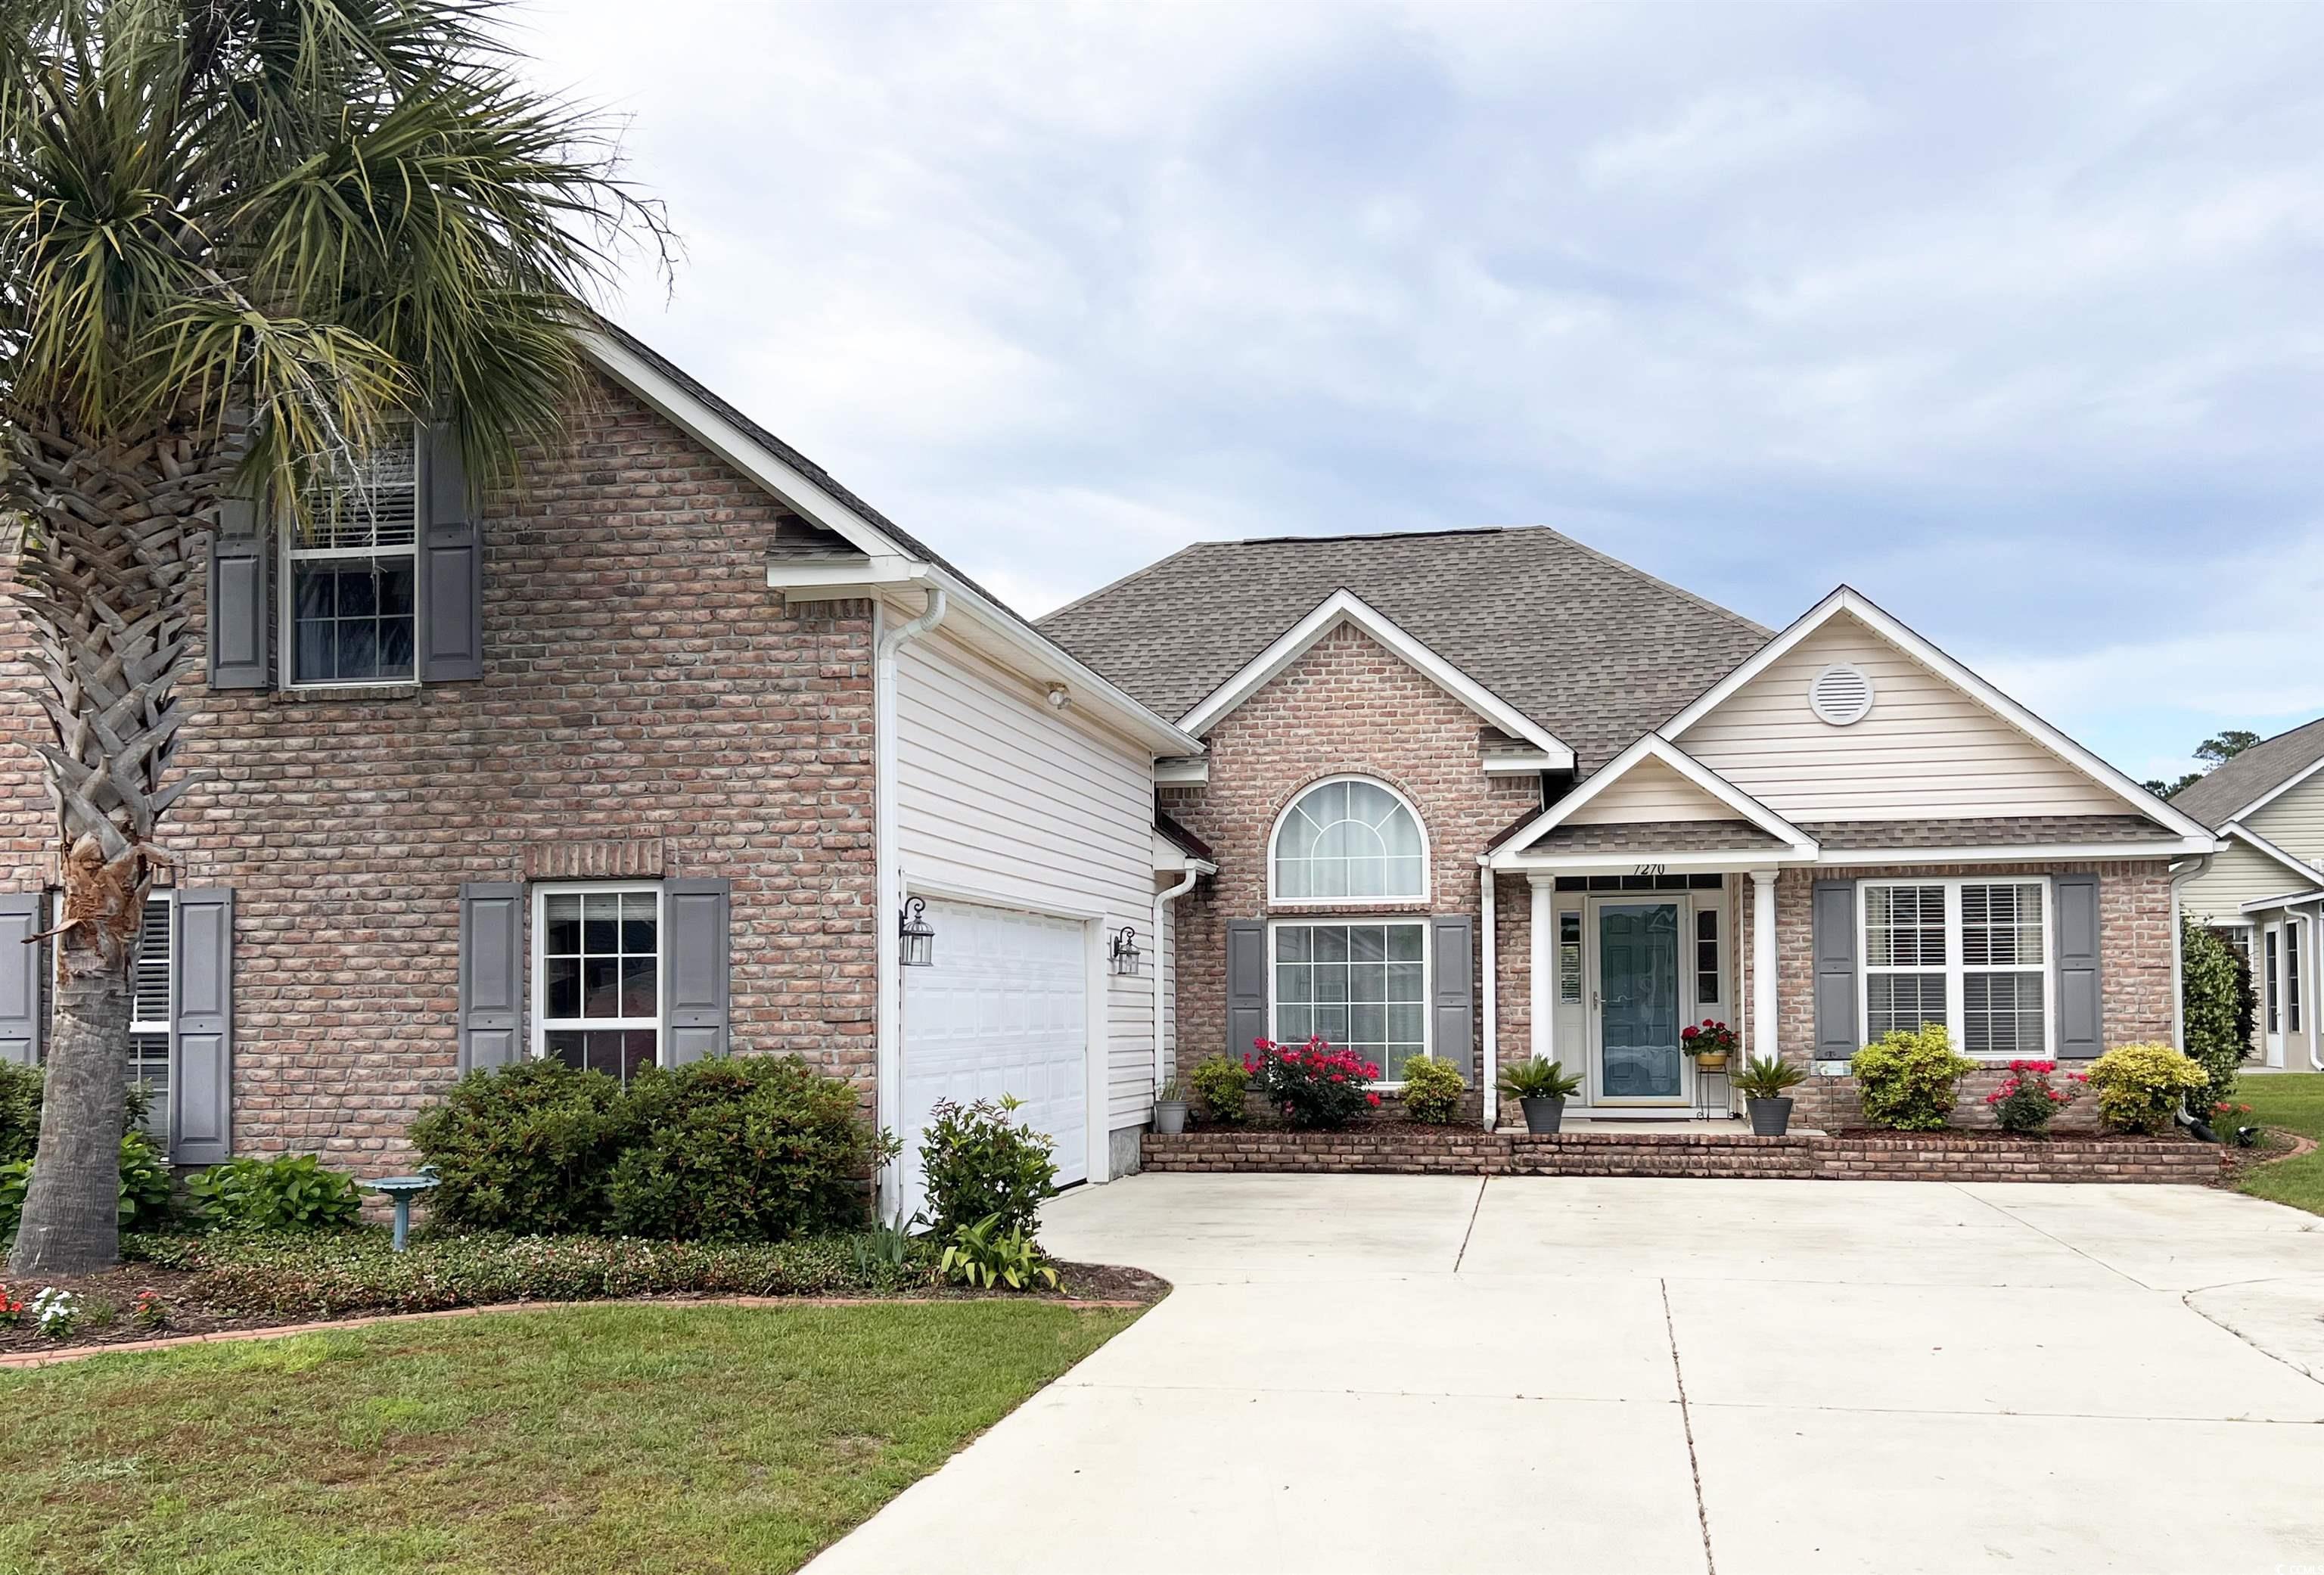 Photo one of 7270 Guinevere Circle Myrtle Beach SC 29588 | MLS 2407680